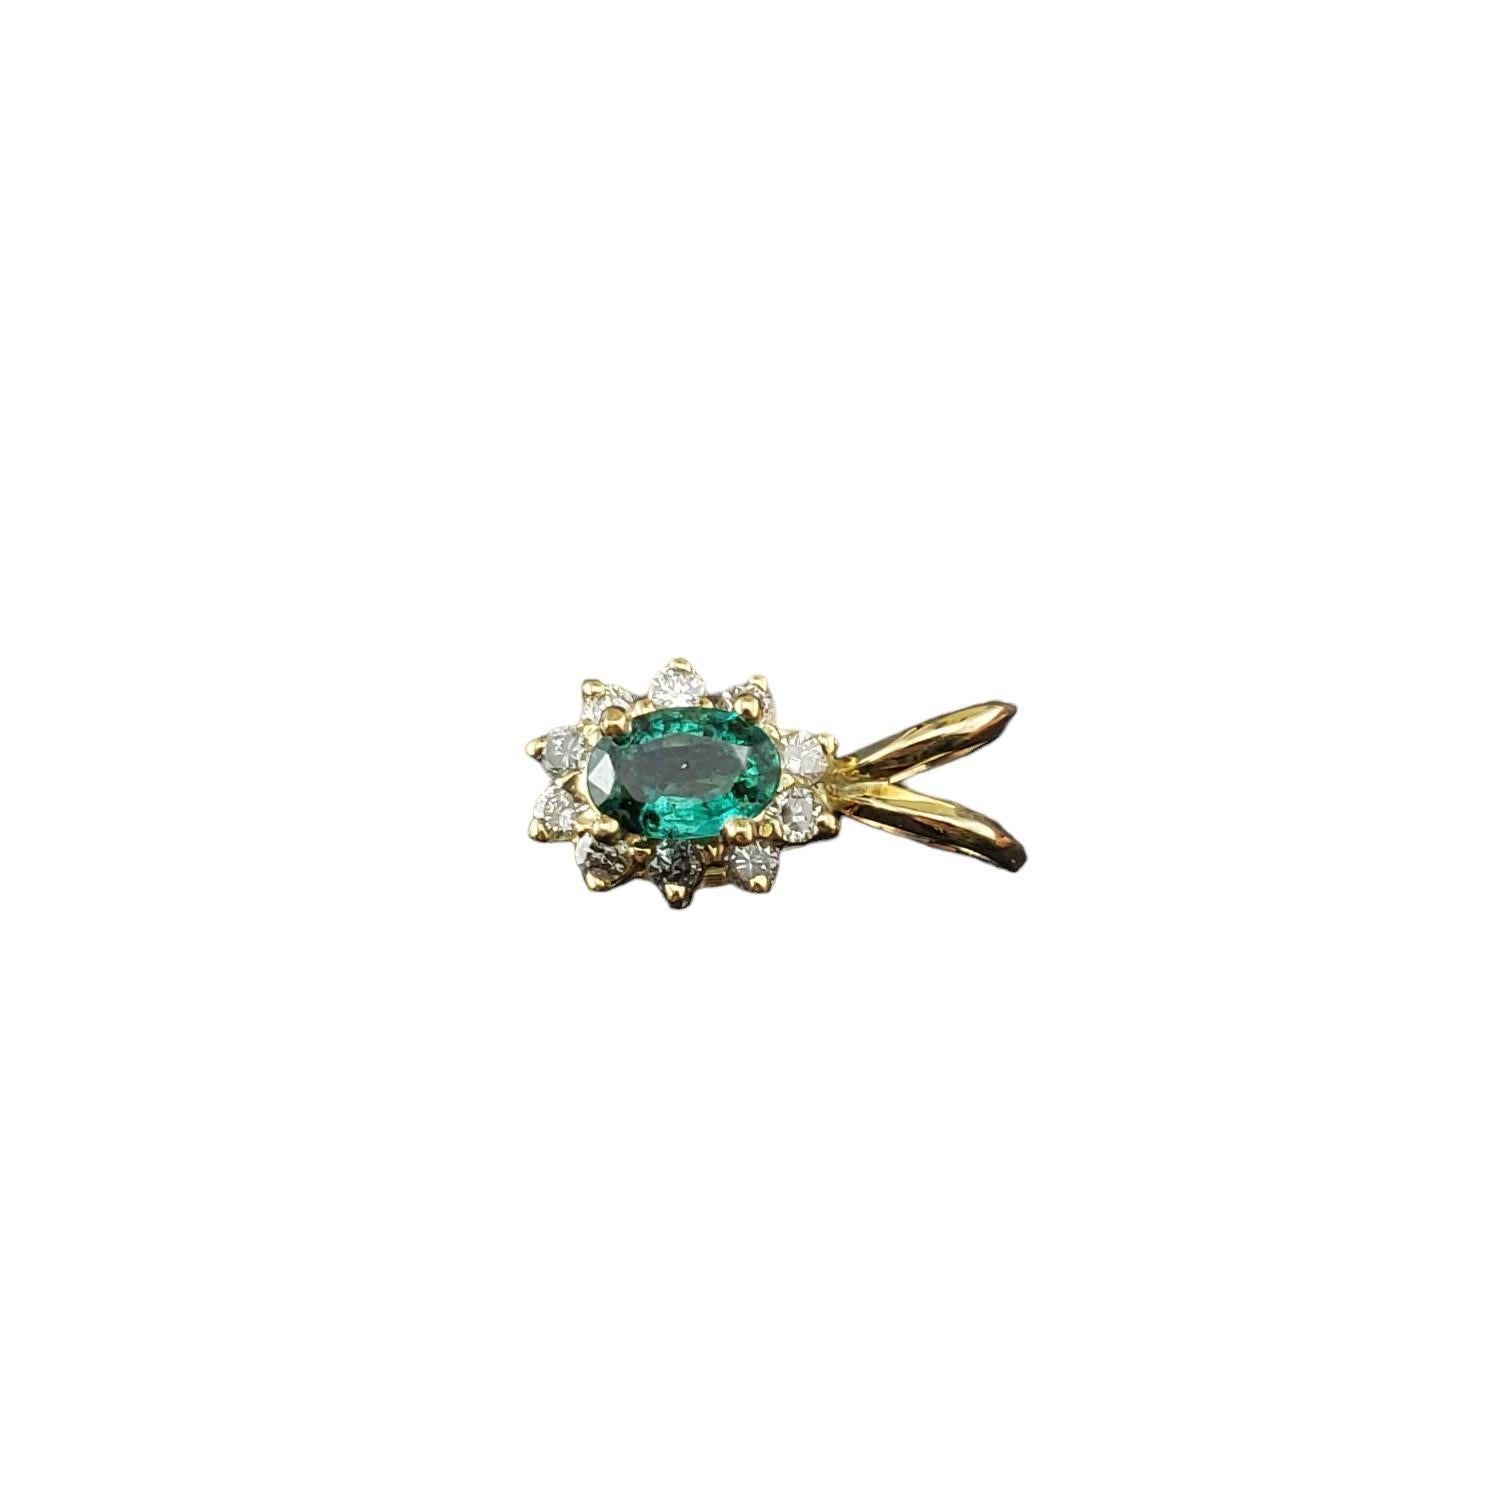 14 Karat Yellow Gold Emerald and Diamond Pendant

This lovely pendant features one oval natural emerald (6 mm x 4 mm) surrounded by ten round brilliant cut diamonds set in 14K yellow gold.

Approximate total diamond weight: .20 ct.

Diamond color: